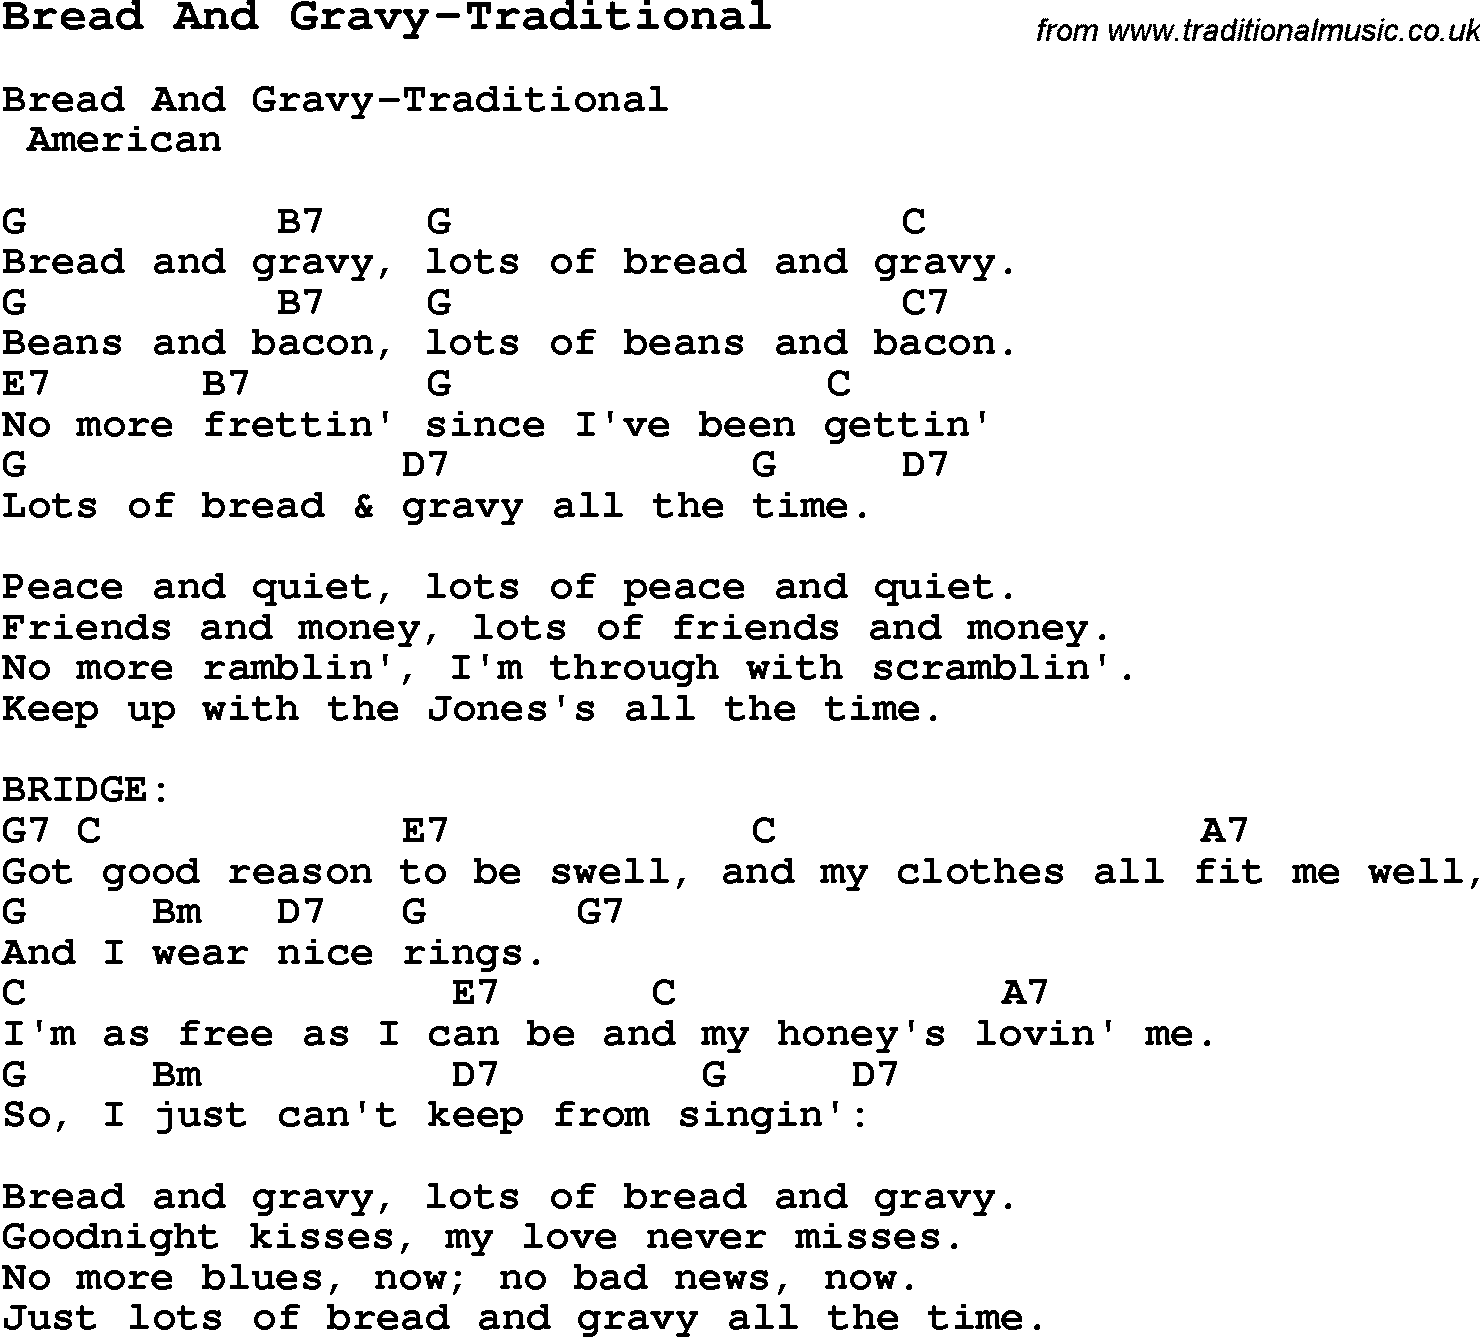 Summer-Camp Song, Bread And Gravy-Traditional, with lyrics and chords for Ukulele, Guitar Banjo etc.